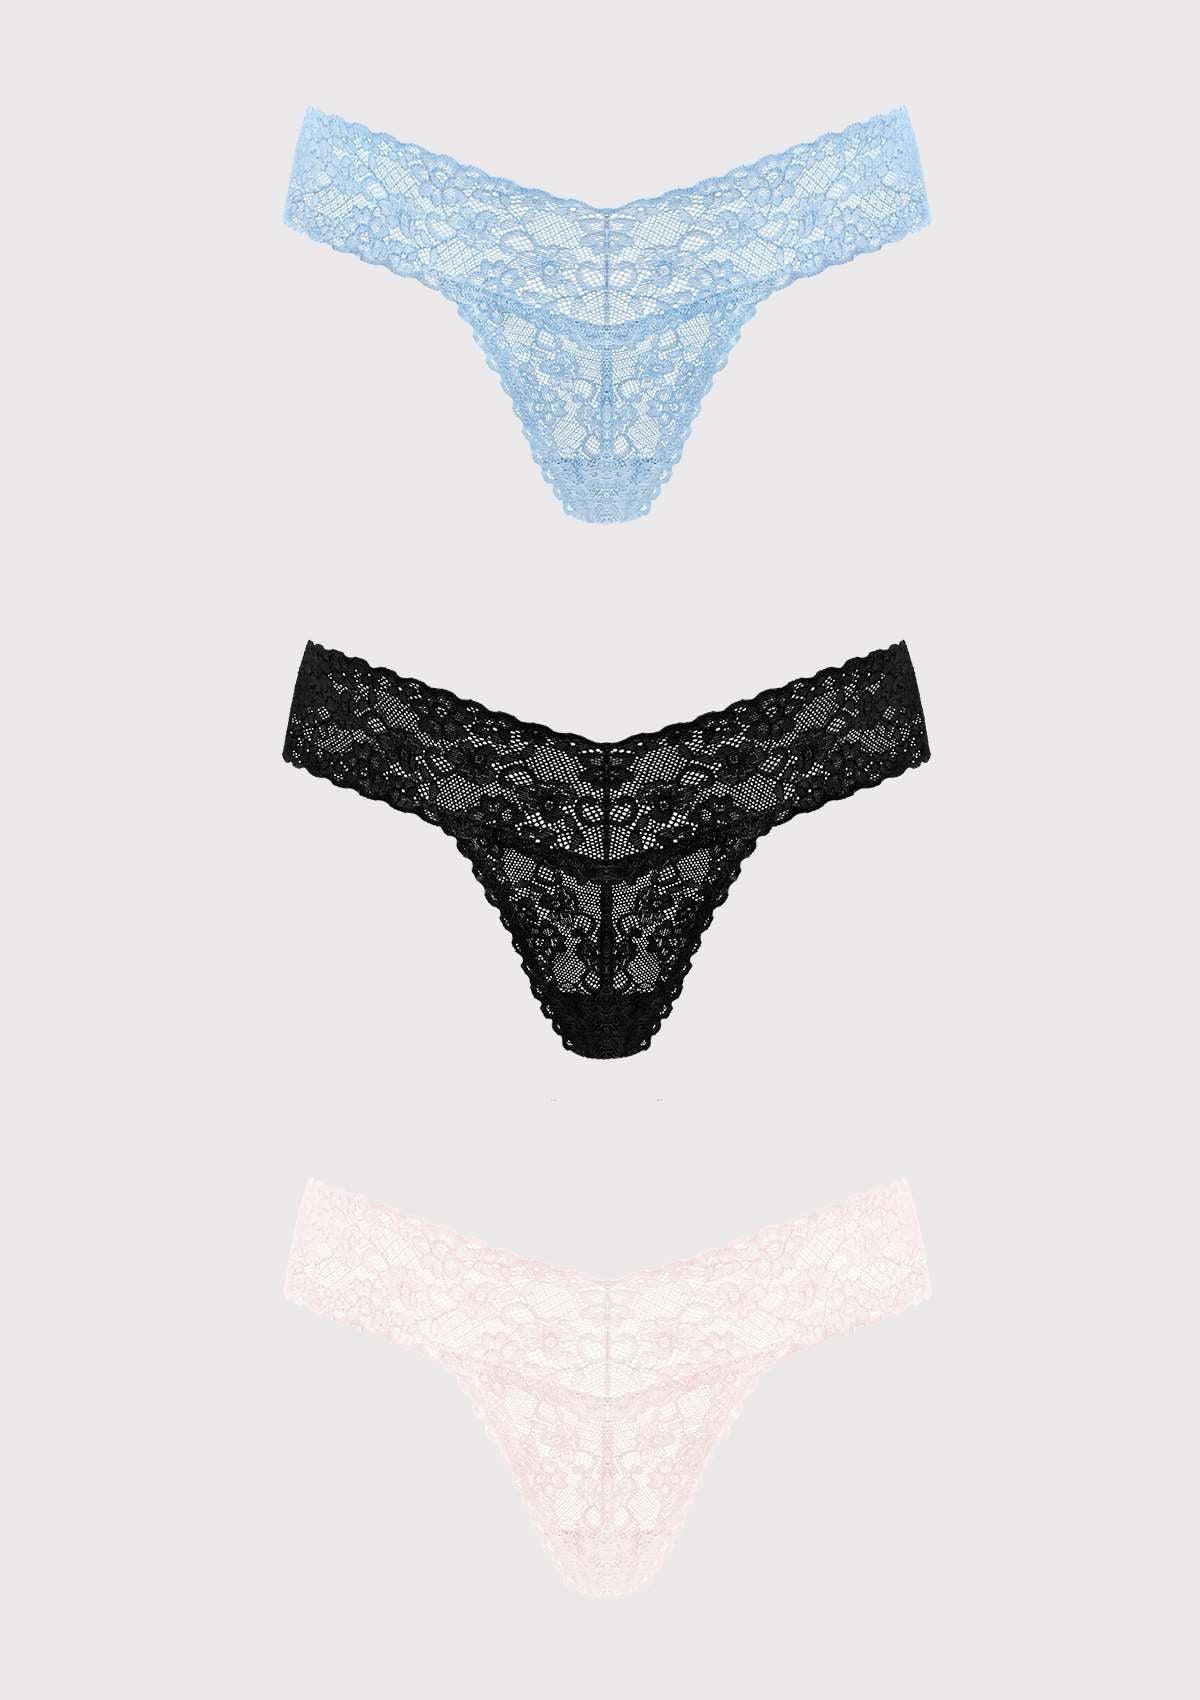 HSIA Soft Sexy Lace Cheeky Thong Underwear 3 Pack - XXL / Black+Storm Blue+Dusty Peach